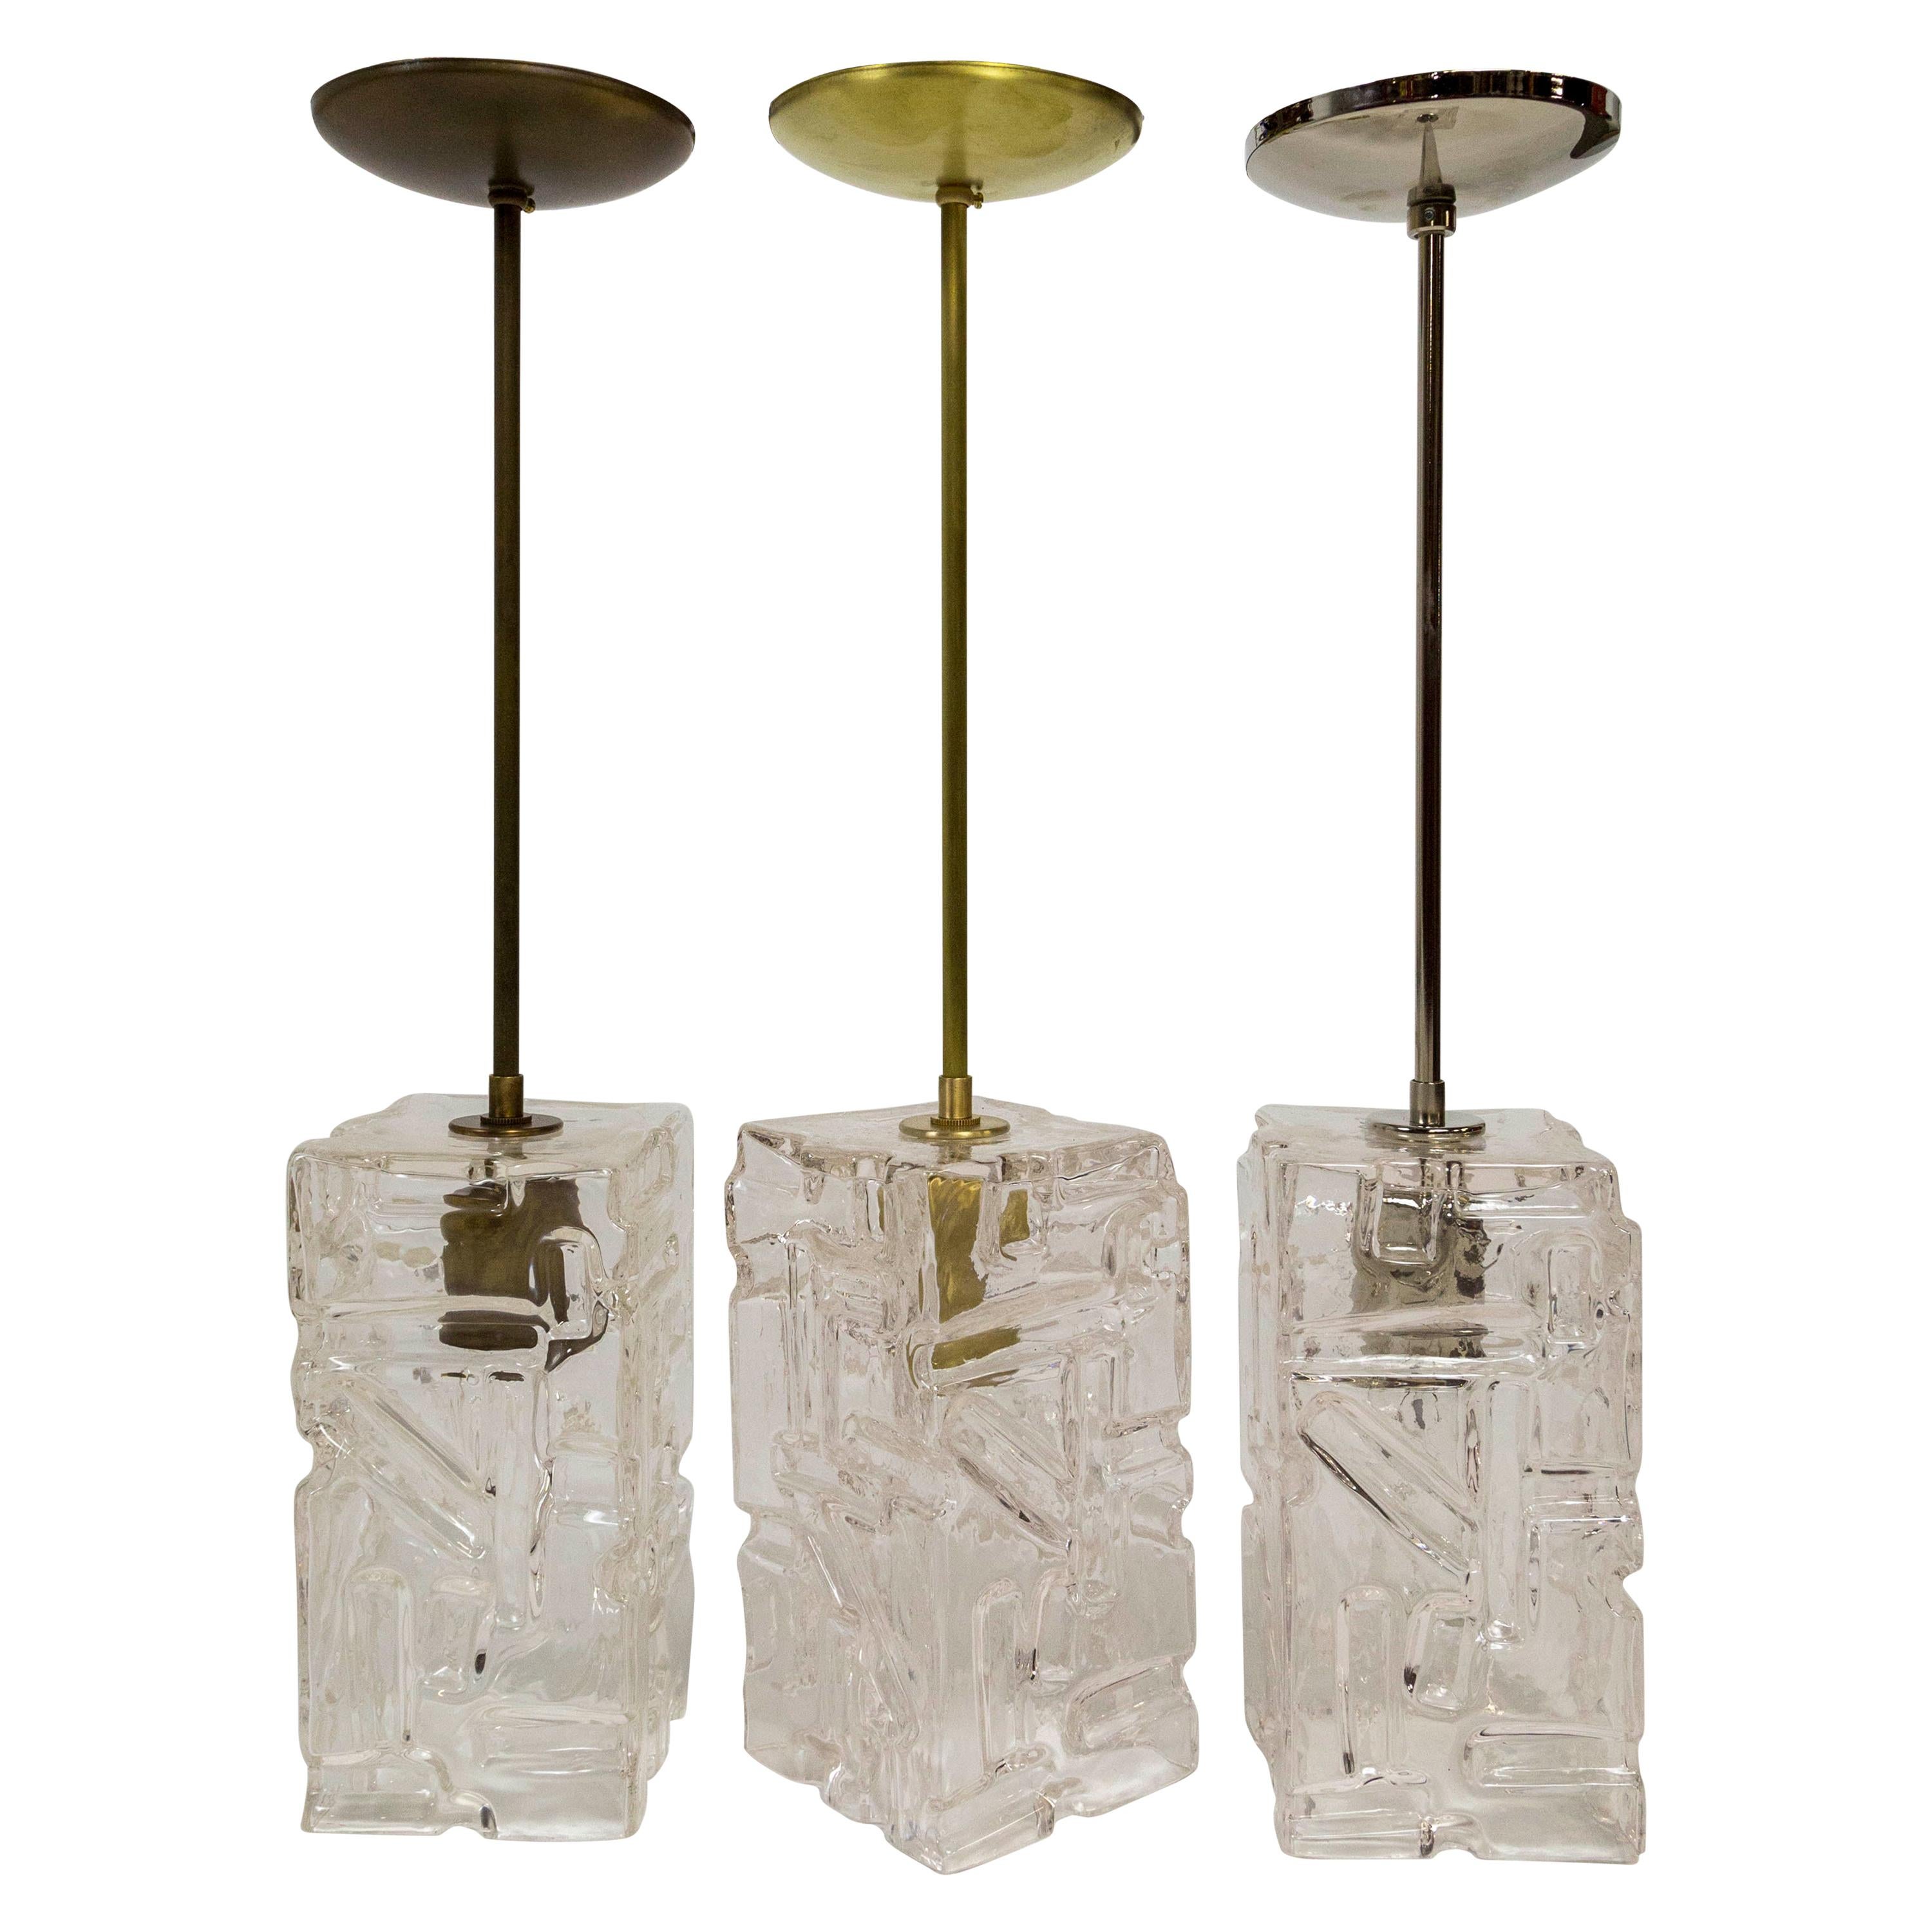 Contemporary Patterned Molded Glass Pendant with Brass Stem '3 Finishes'